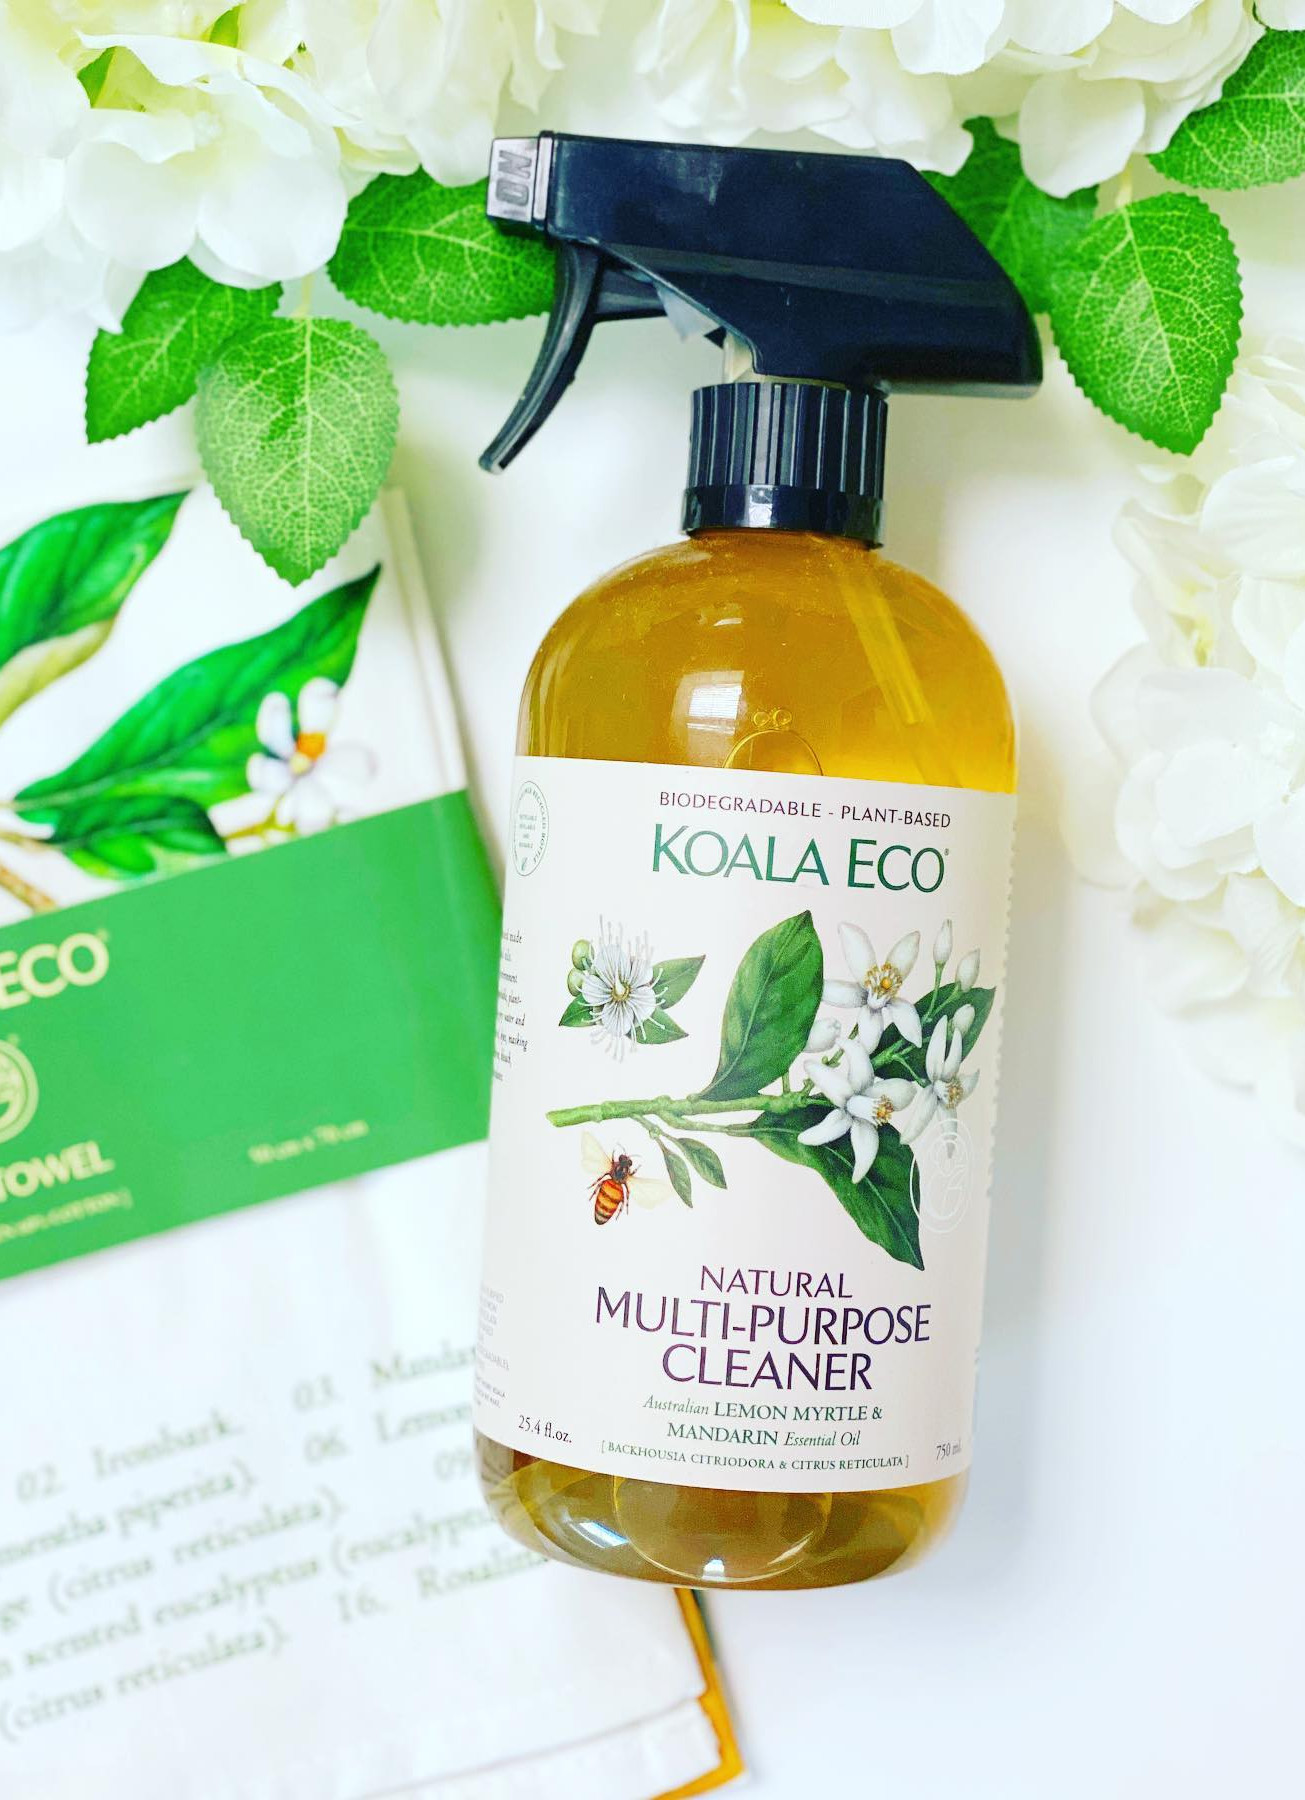 Koala Eco organic cleaning product reviews and promo code, multi purpose cleaner